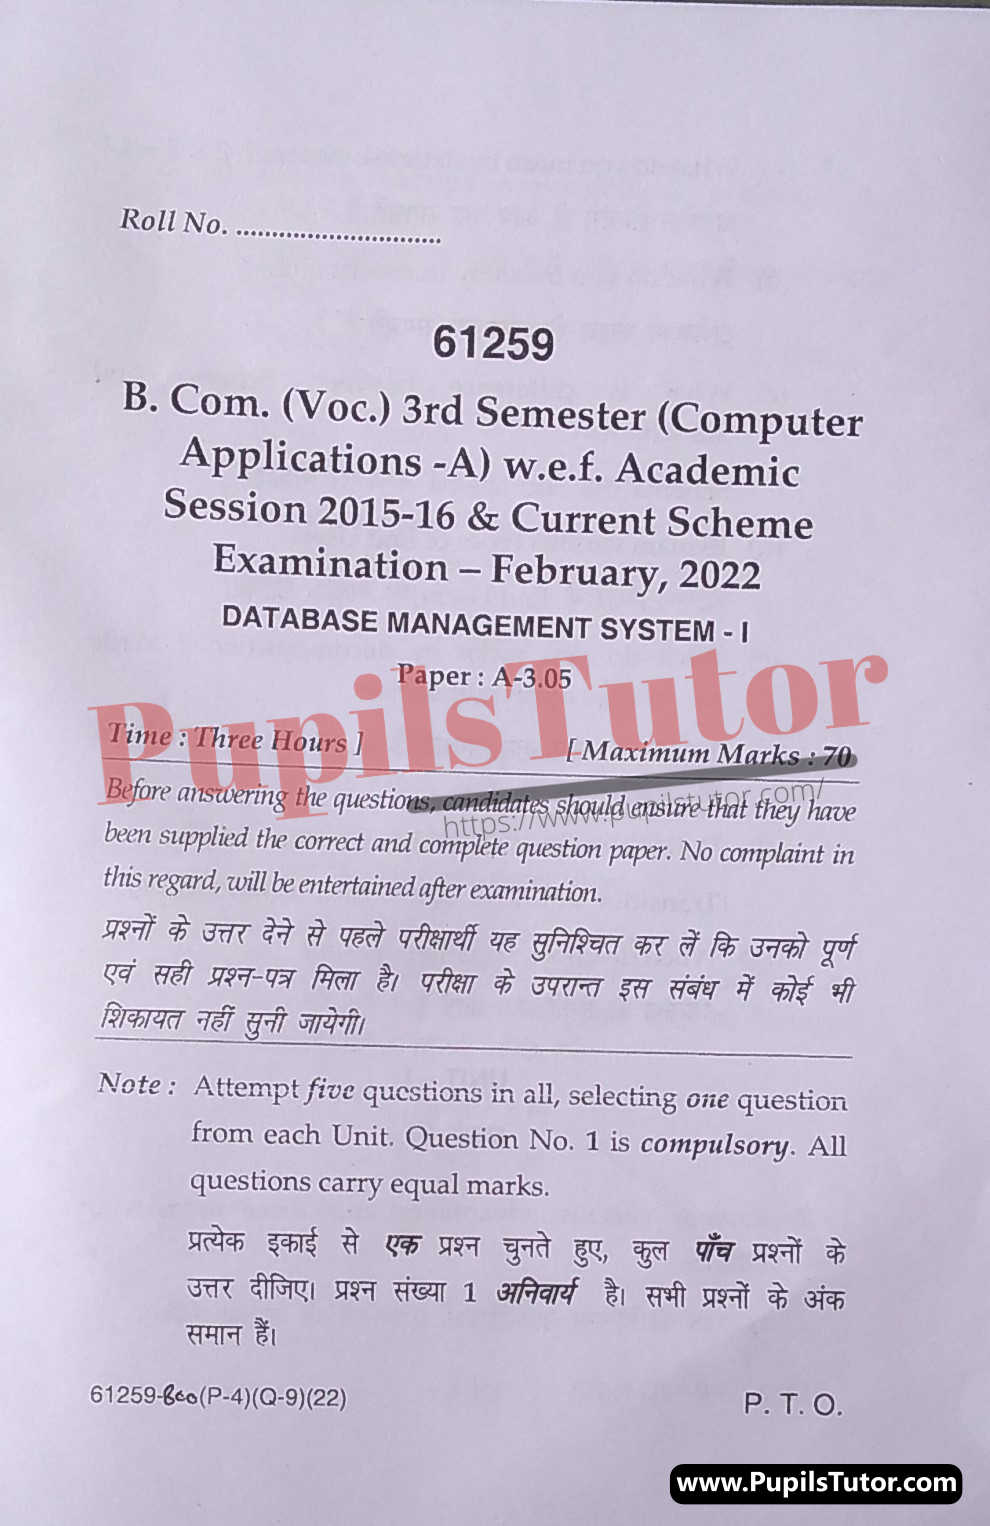 MDU (Maharshi Dayanand University, Rohtak Haryana) Bcom (Voc.) Vocational Third Semester Previous Year Database Management System Question Paper For February, 2022 Exam (Question Paper Page 1) - pupilstutor.com